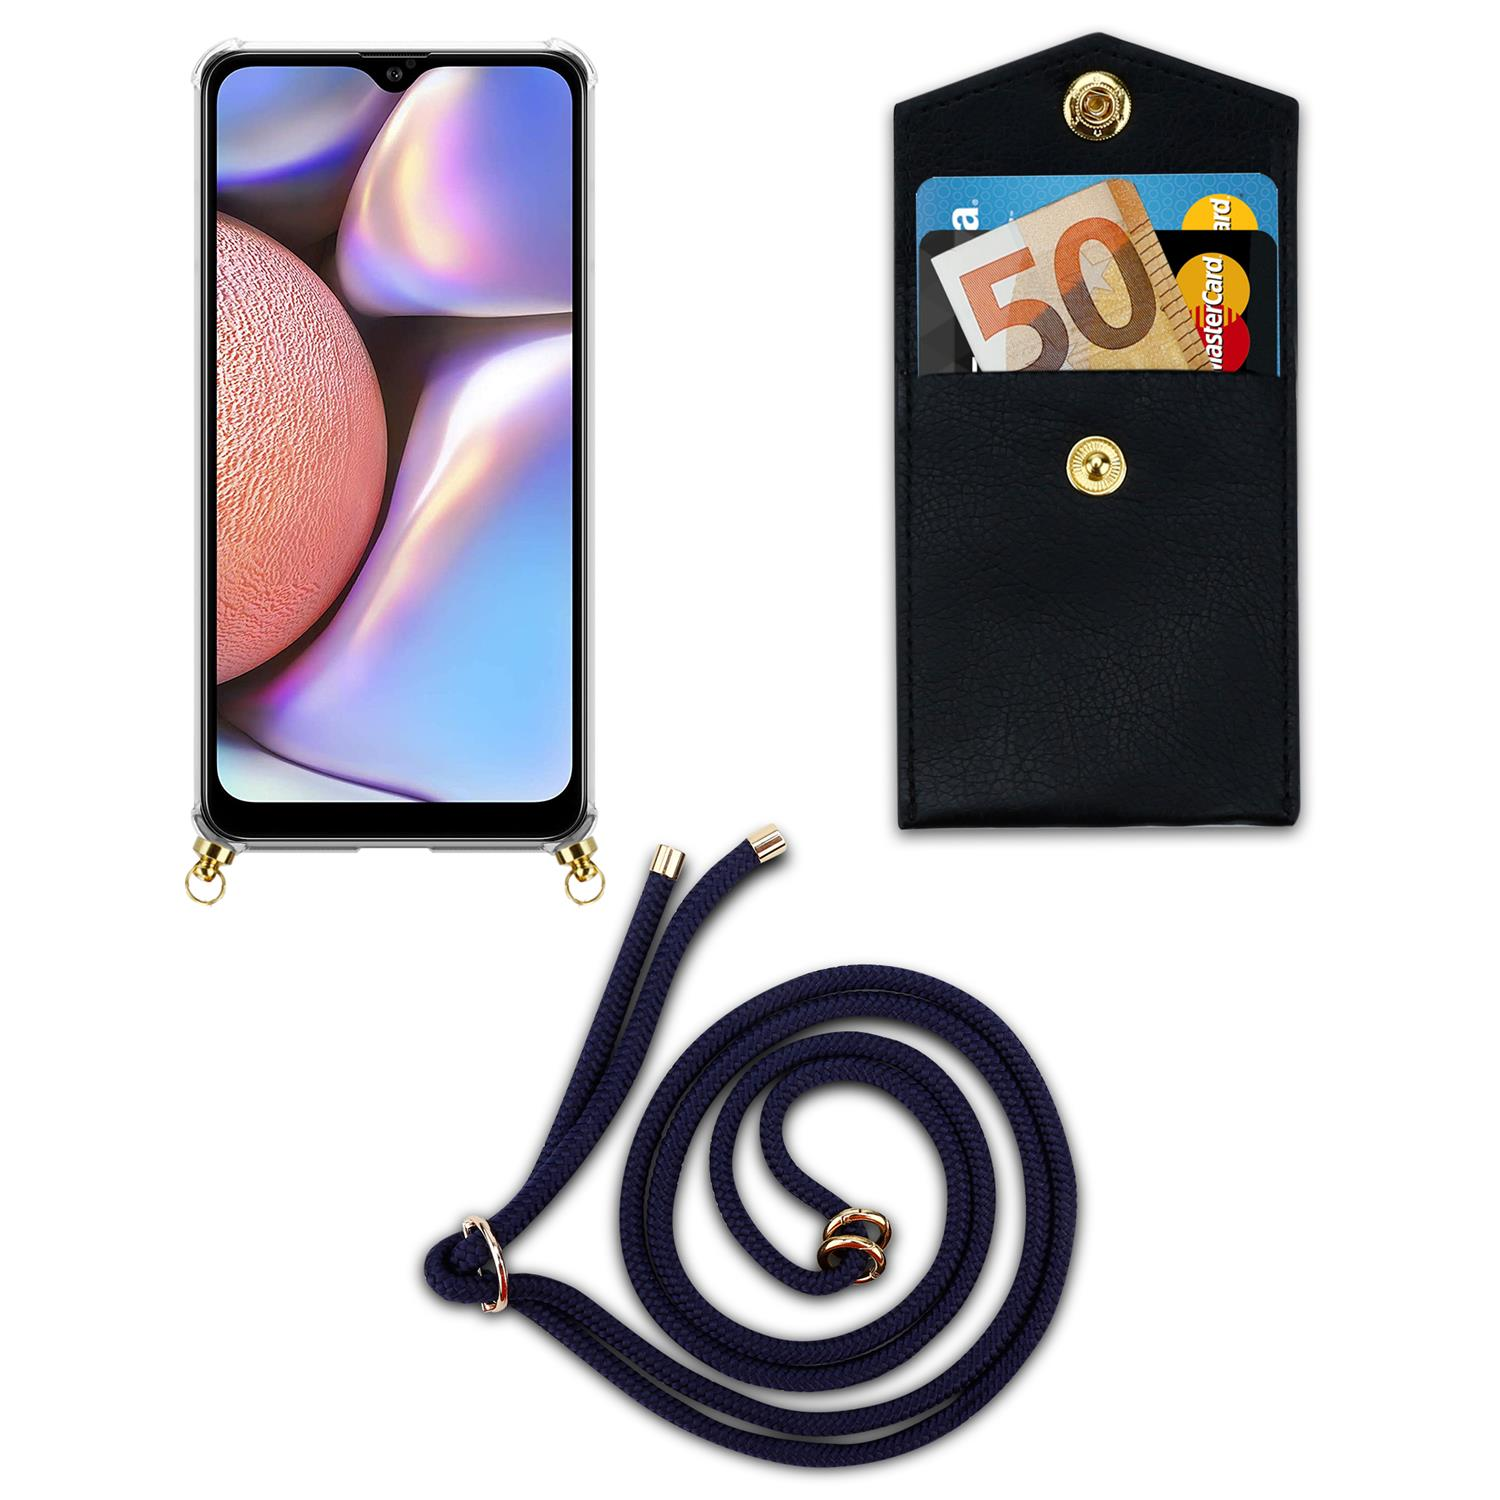 CADORABO BLAU Hülle, Kordel M01s, abnehmbarer mit A10s / Backcover, Galaxy Ringen, Kette und Handy Samsung, Gold Band TIEF